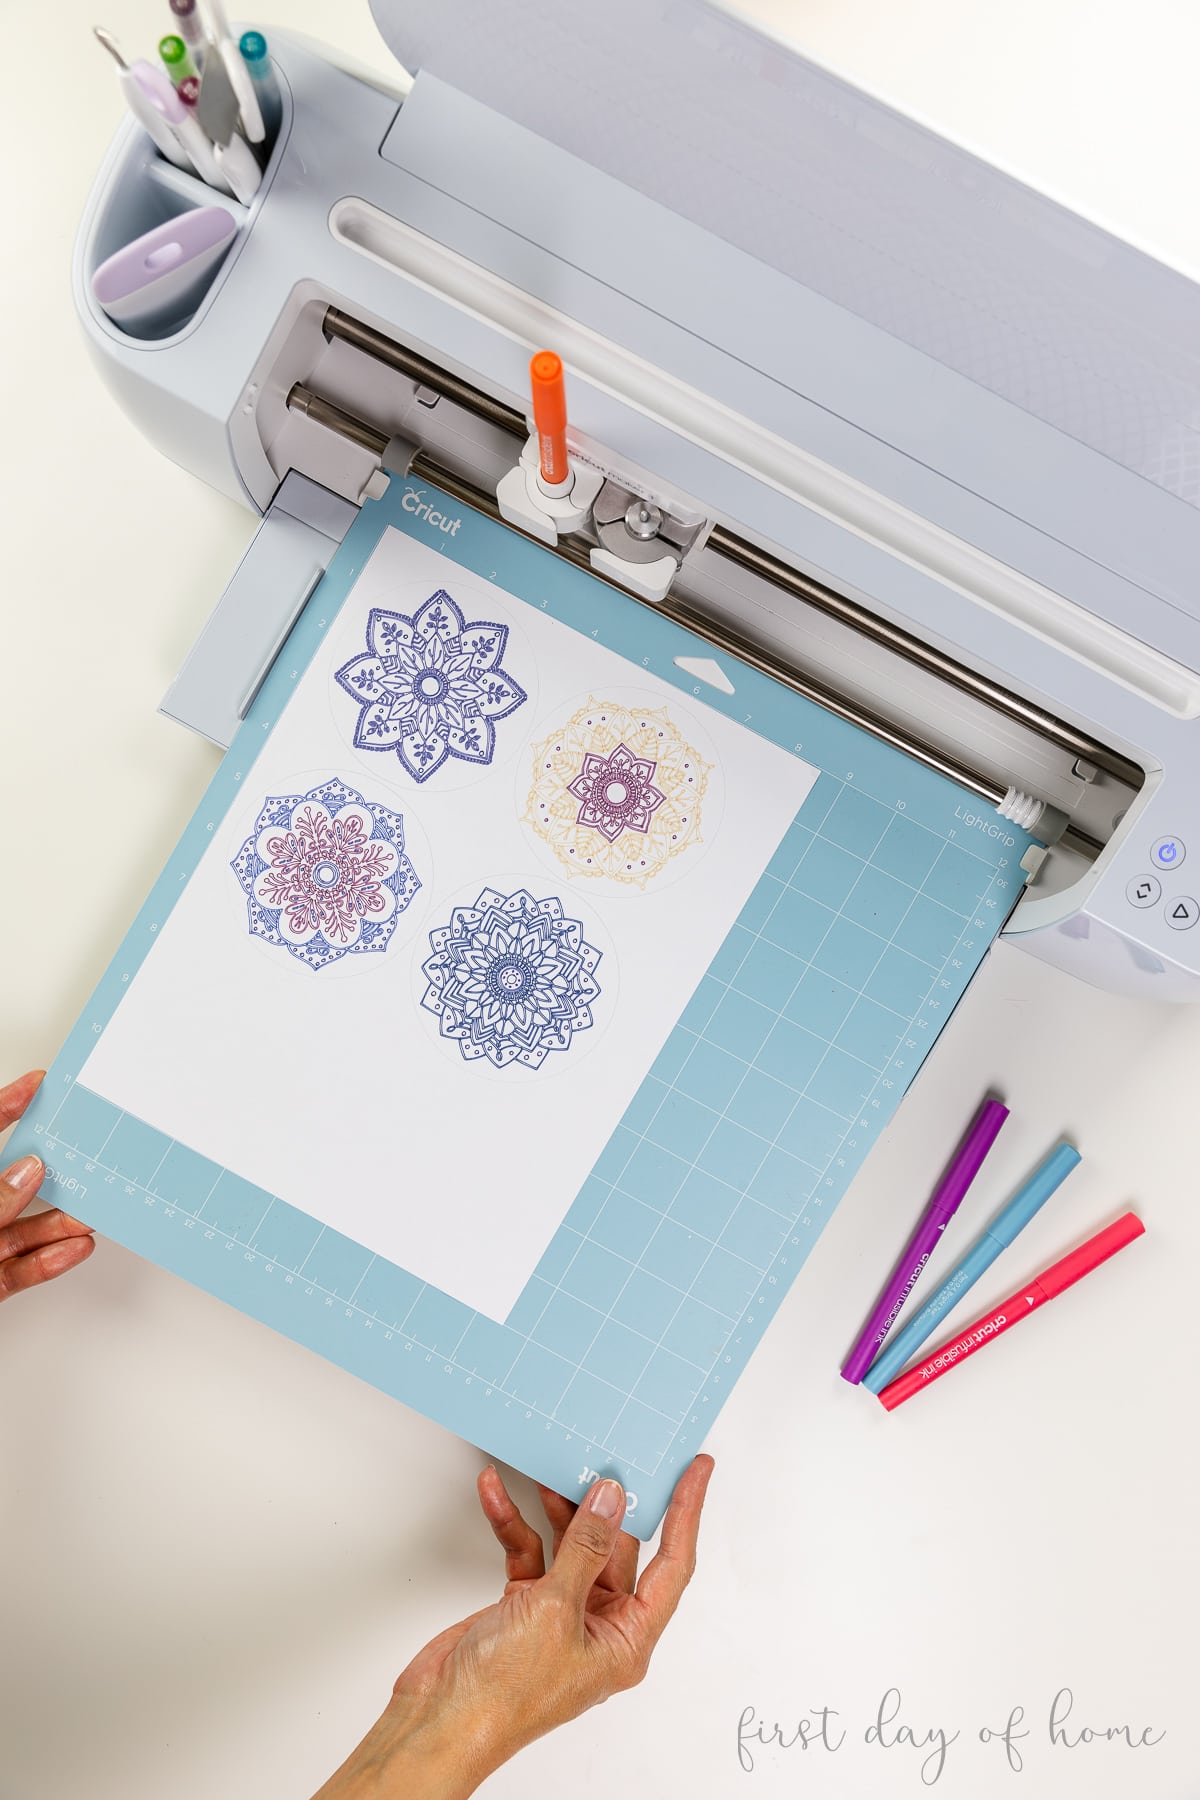 Unloading Cricut cutting mat with mandala designs drawn with Cricut infusible ink pens